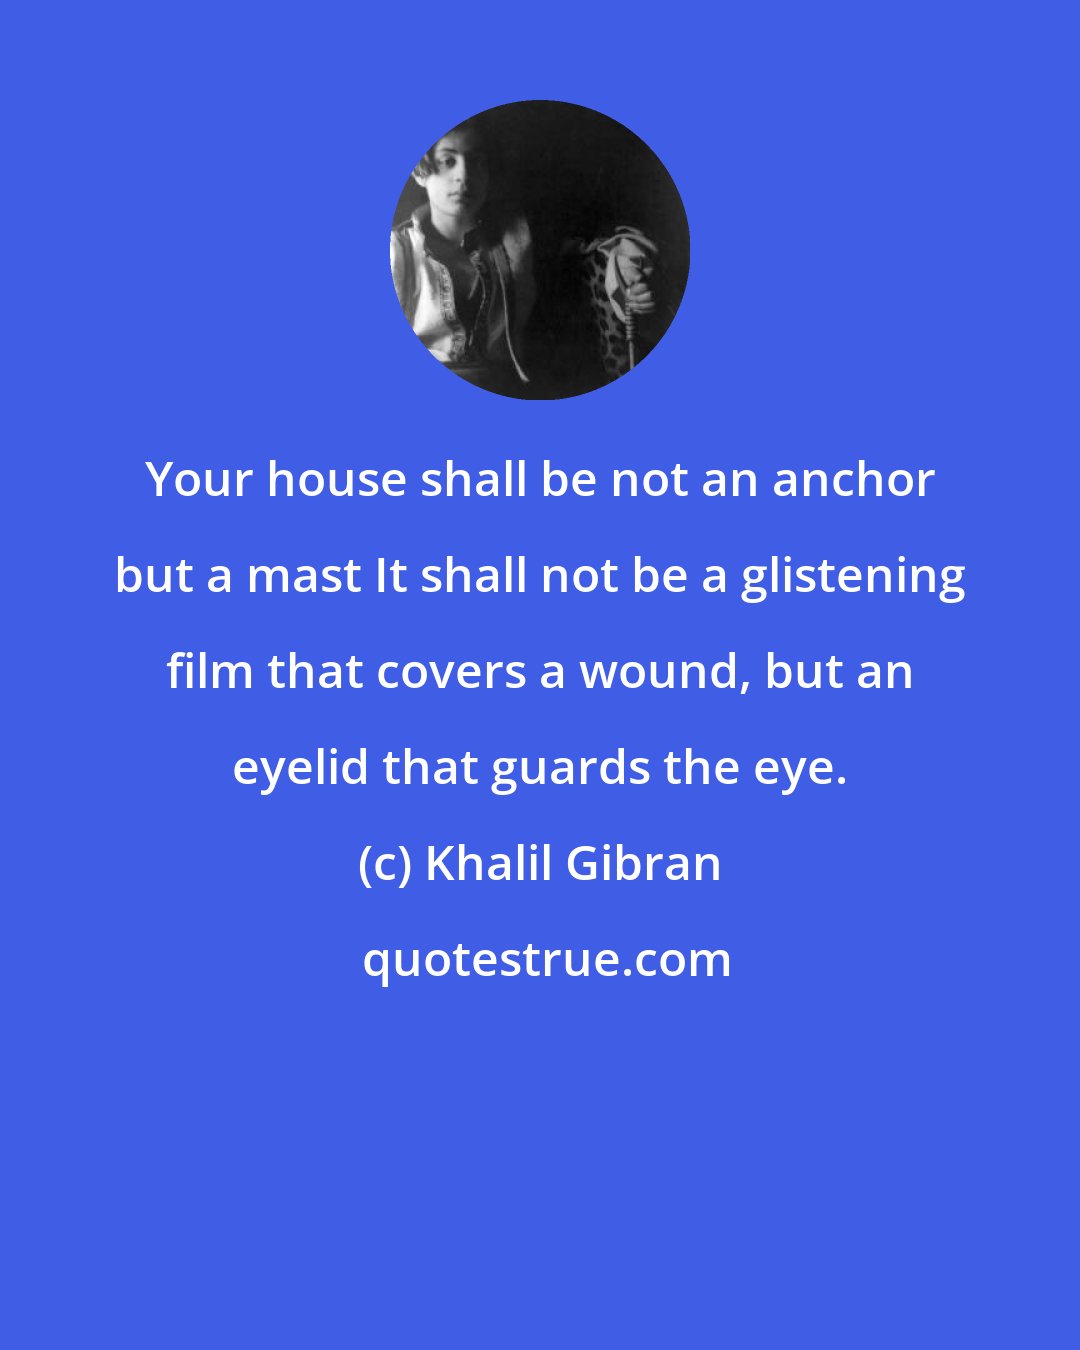 Khalil Gibran: Your house shall be not an anchor but a mast It shall not be a glistening film that covers a wound, but an eyelid that guards the eye.